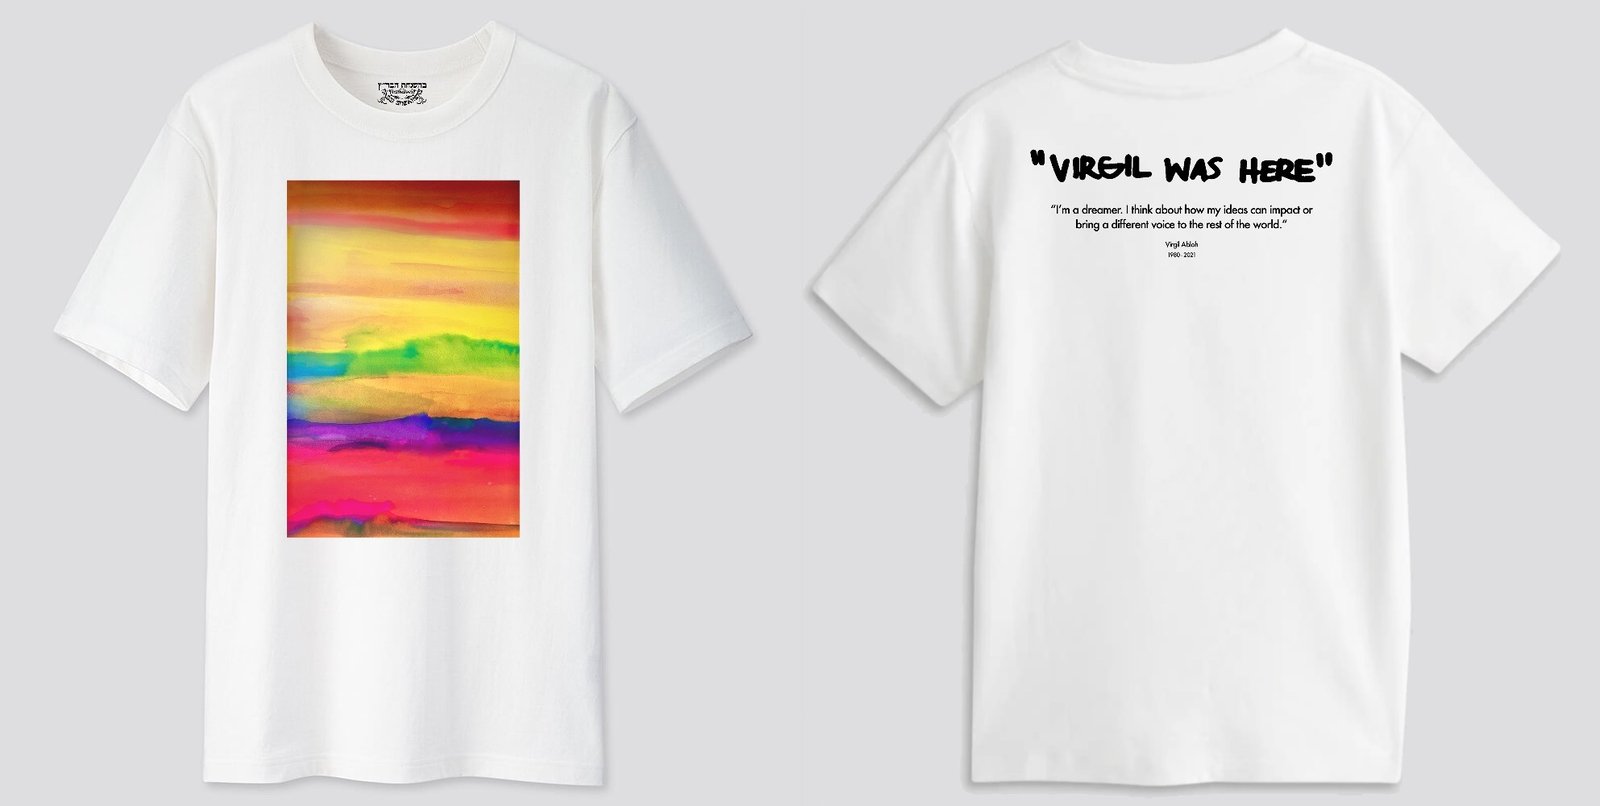 virgil was here shirt